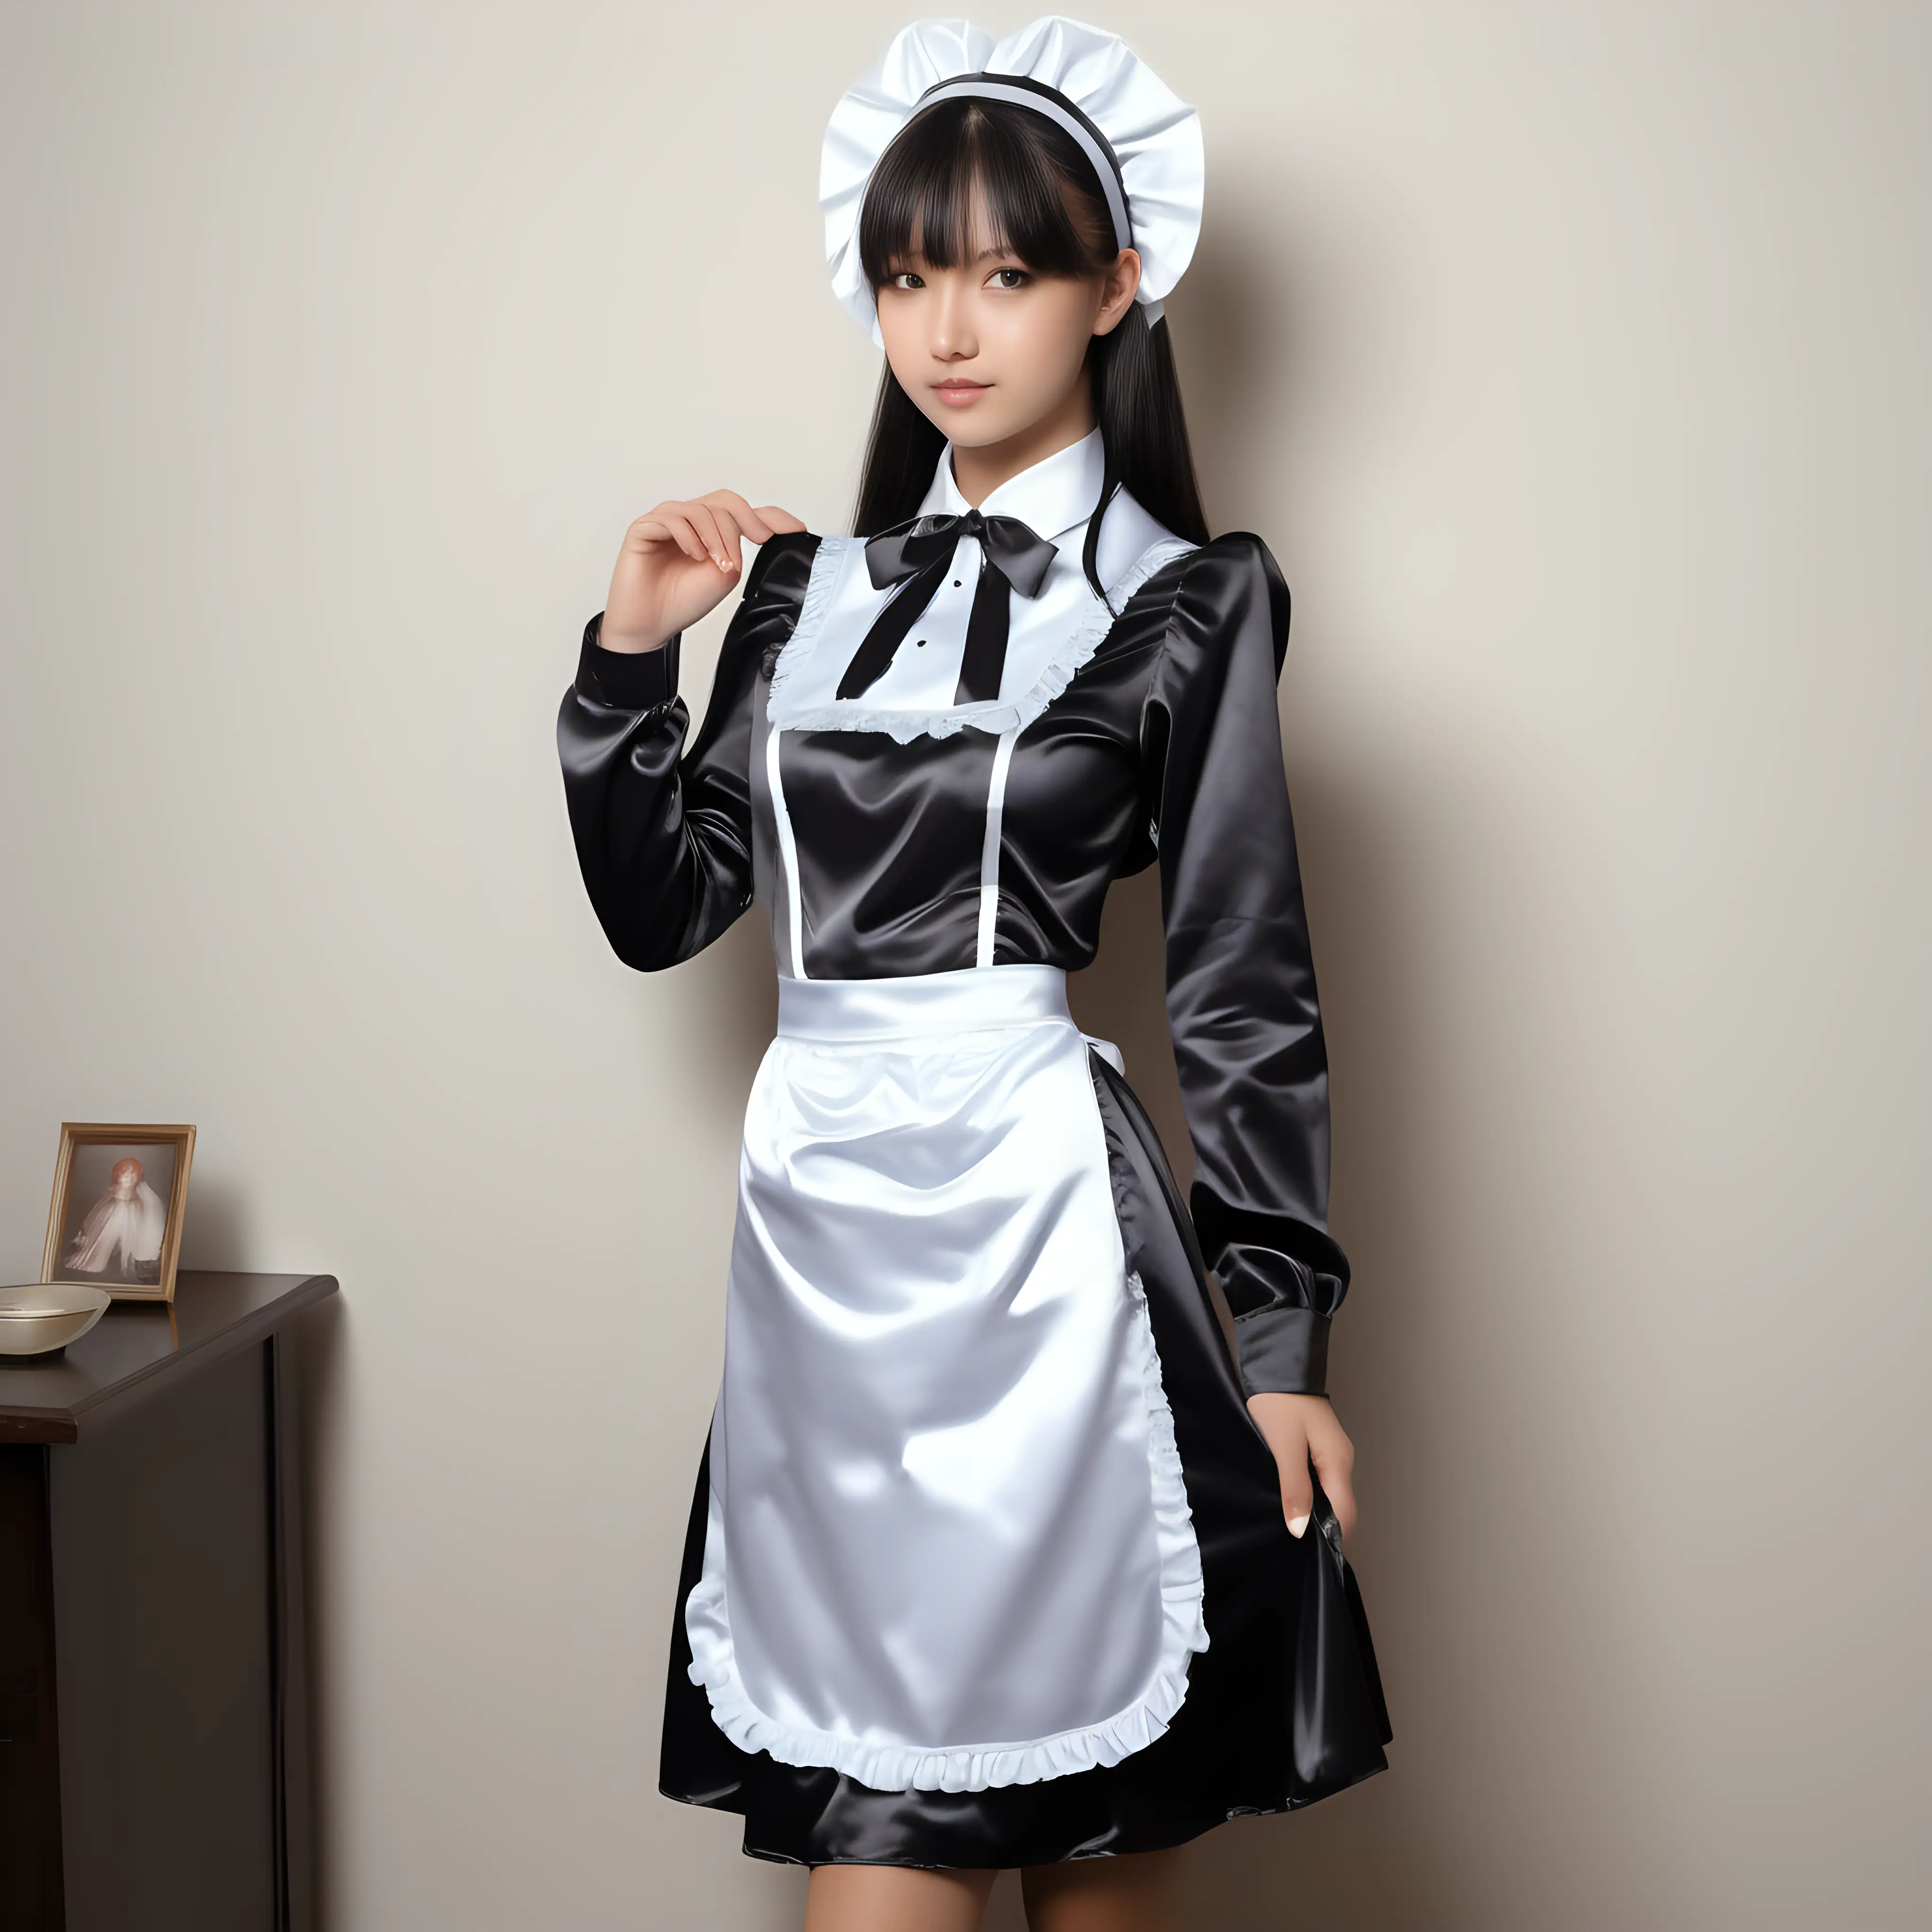 Elegant Maid Uniforms SatinClad Girls in a Timeless Display of Grace